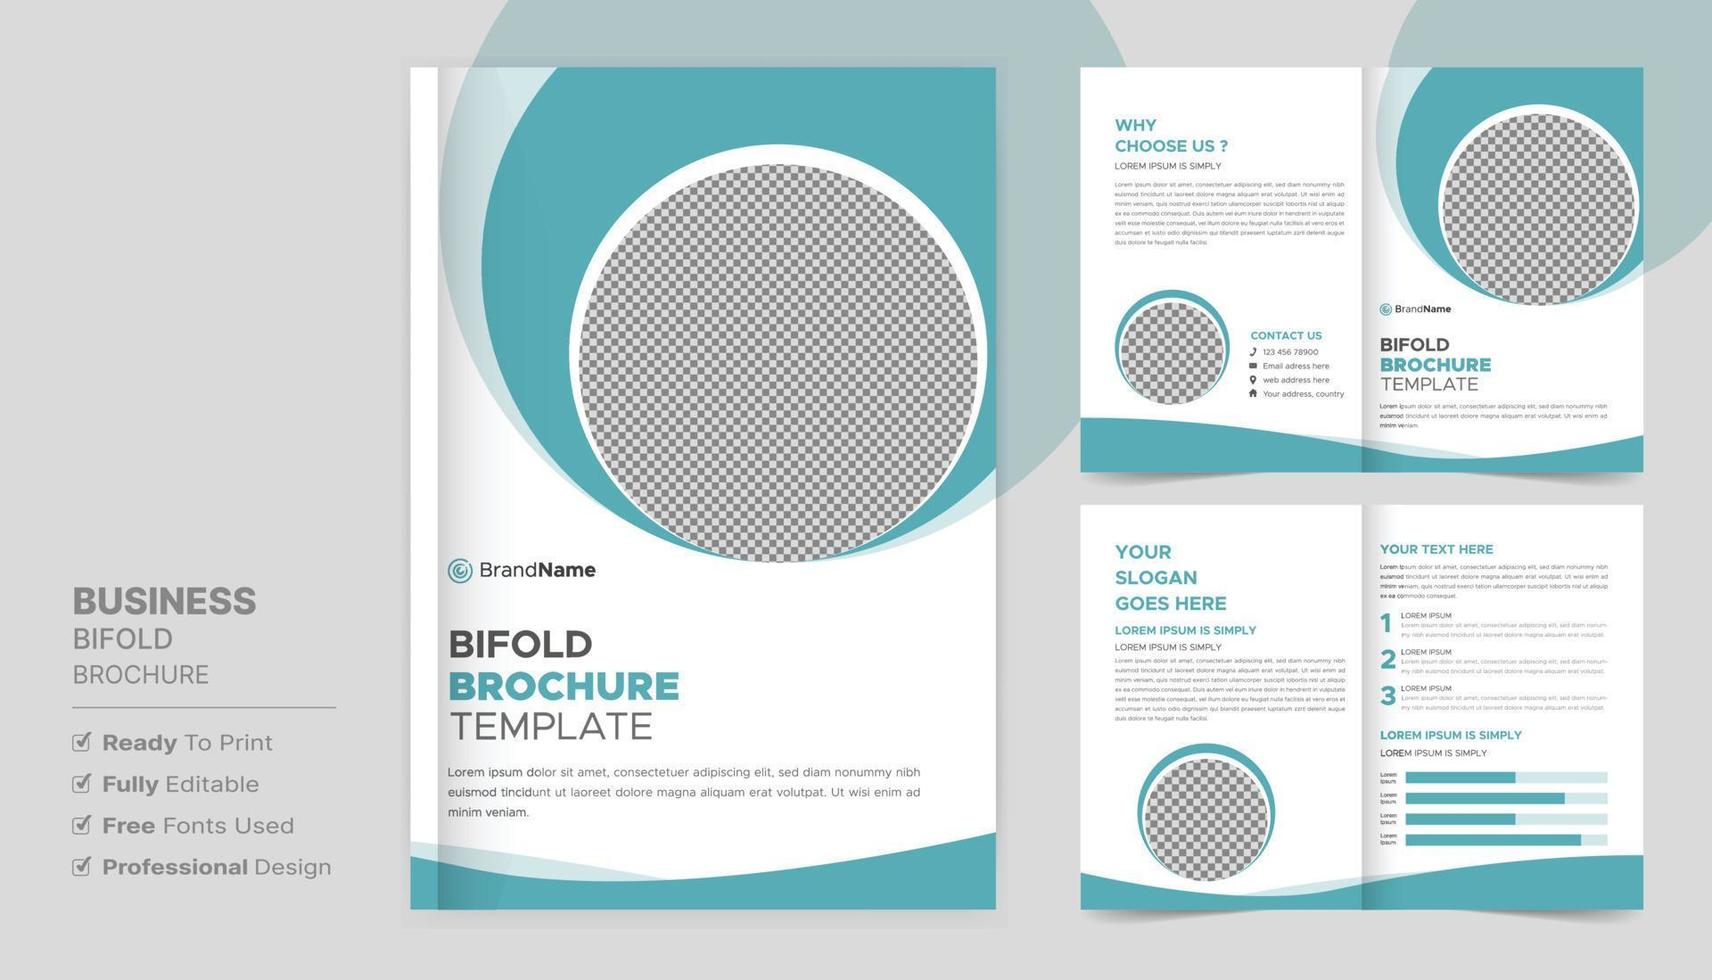 Bifold Brochure Design Template For Your Company, Corporate, Business, Advertising, Marketing, Agency, And Internet Business. vector